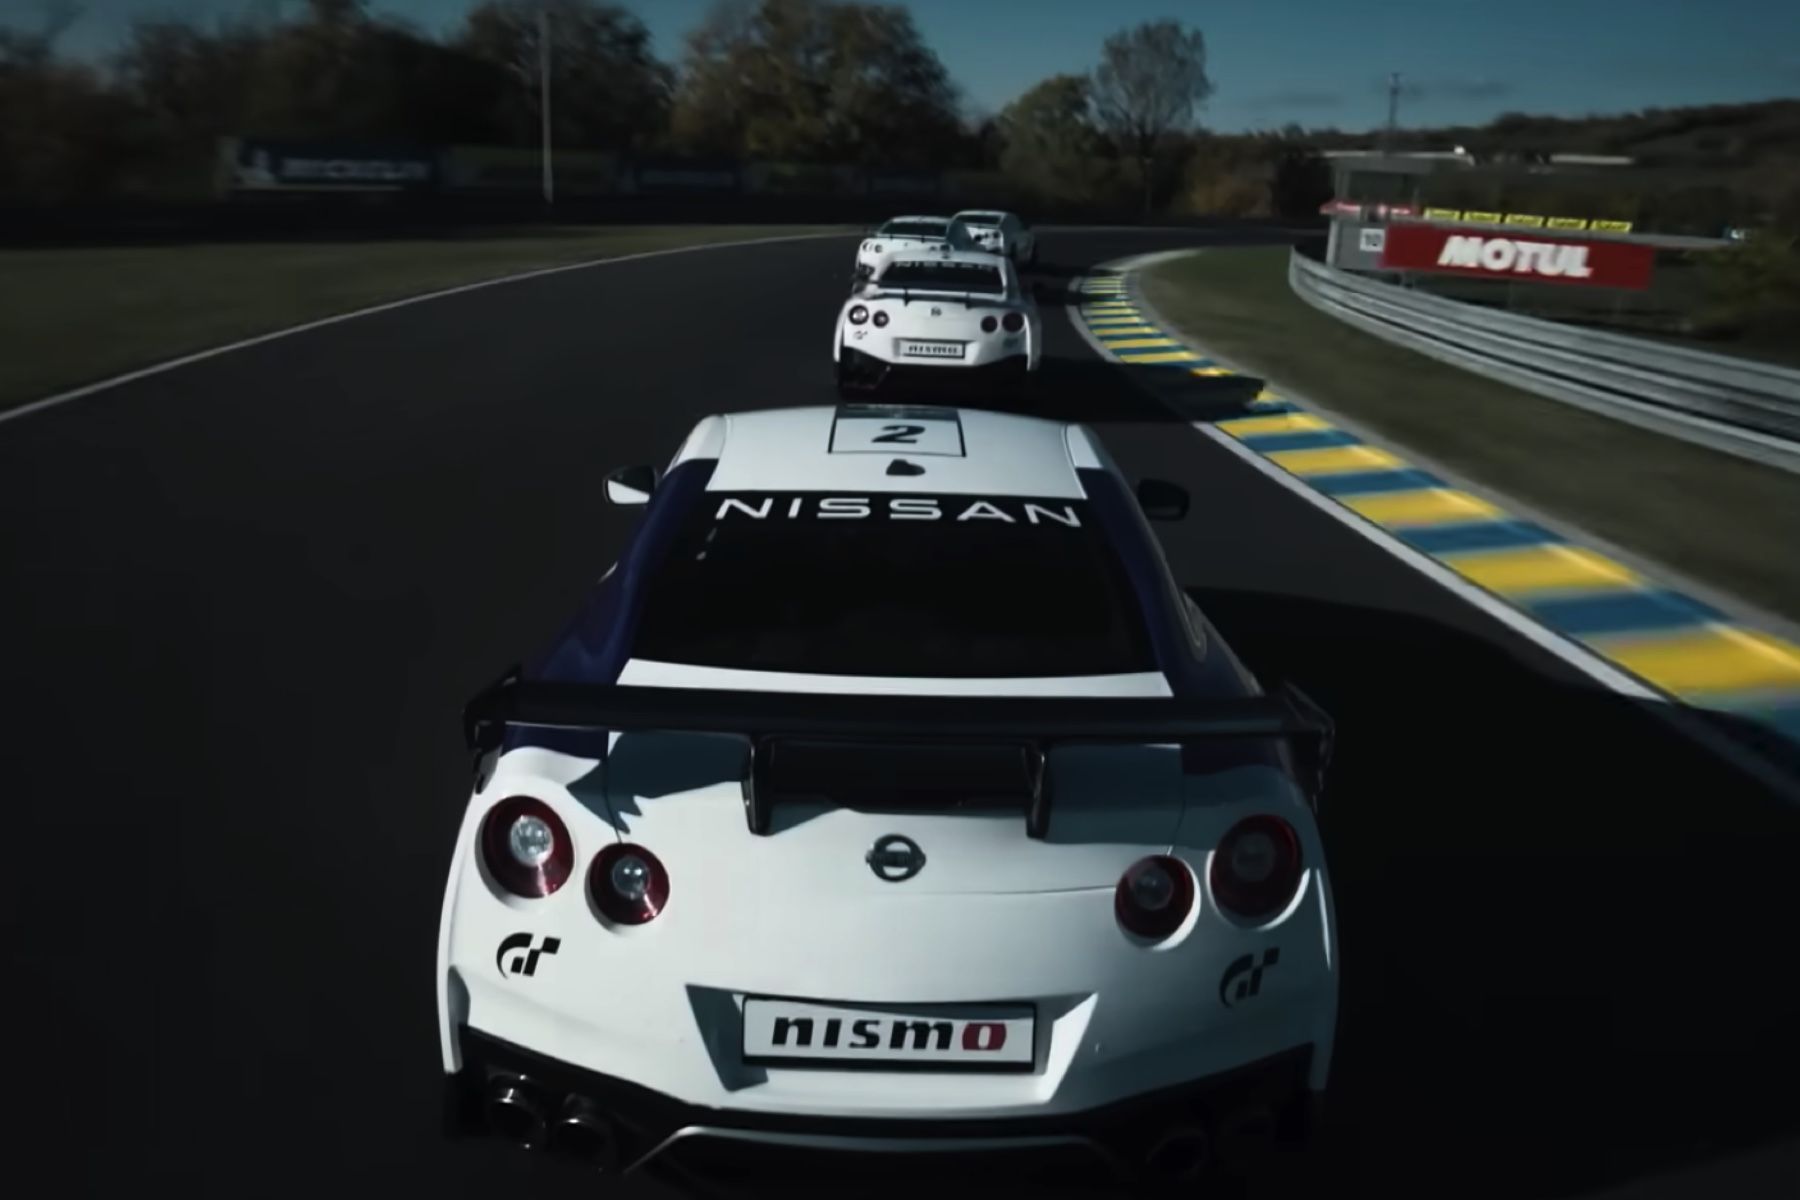 Gran Turismo 7's Latest Update Adds Content From The Film